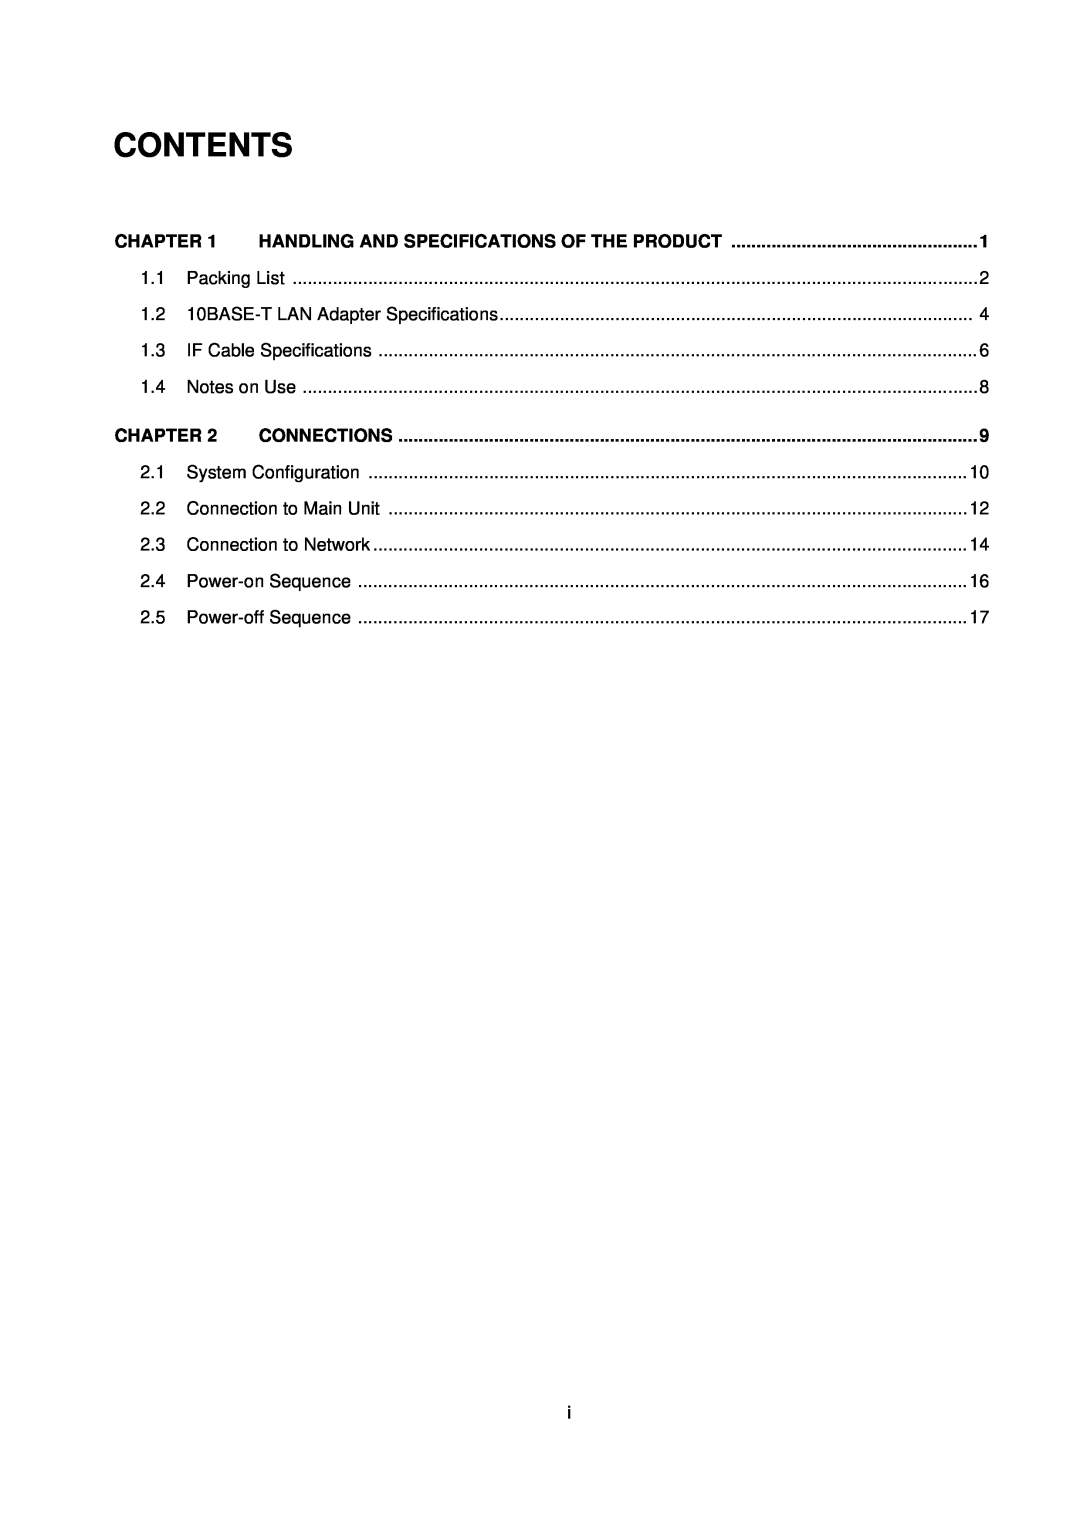 Fujitsu MB2142-02 user manual Contents, Chapter, Handling And Specifications Of The Product, Connections 